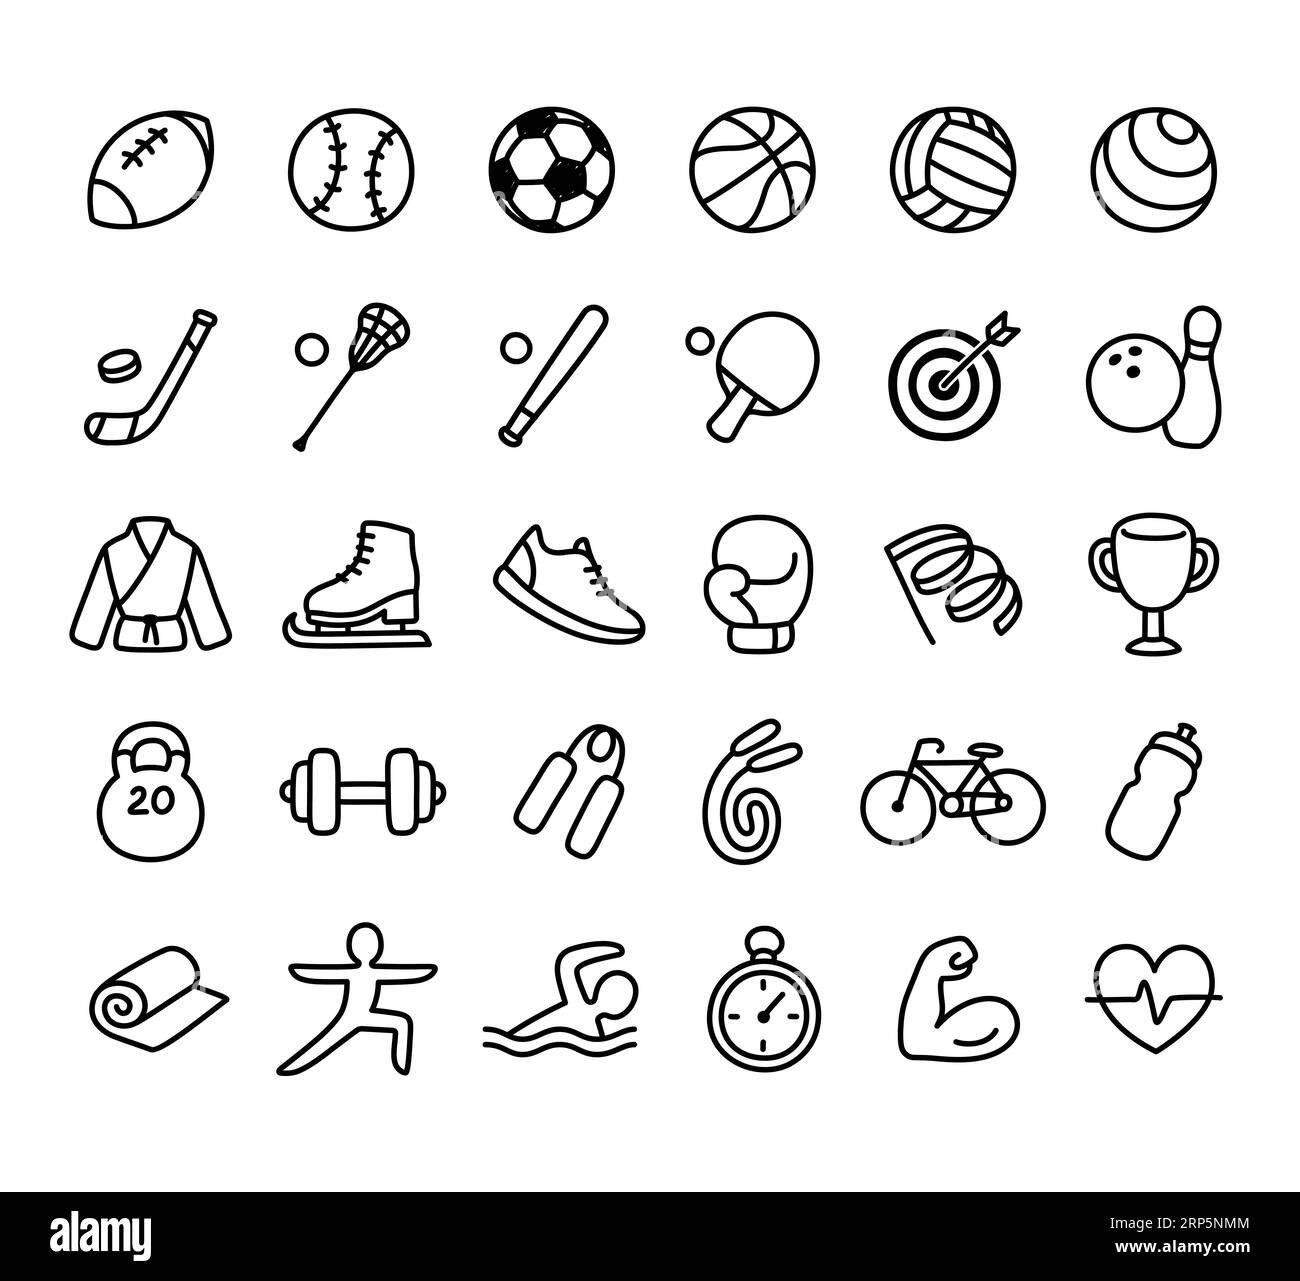 Set of hand drawn sport and fitness line icons. Simple cartoon doodles of ball games, equipment, and other sports related symbols. Stock Vector